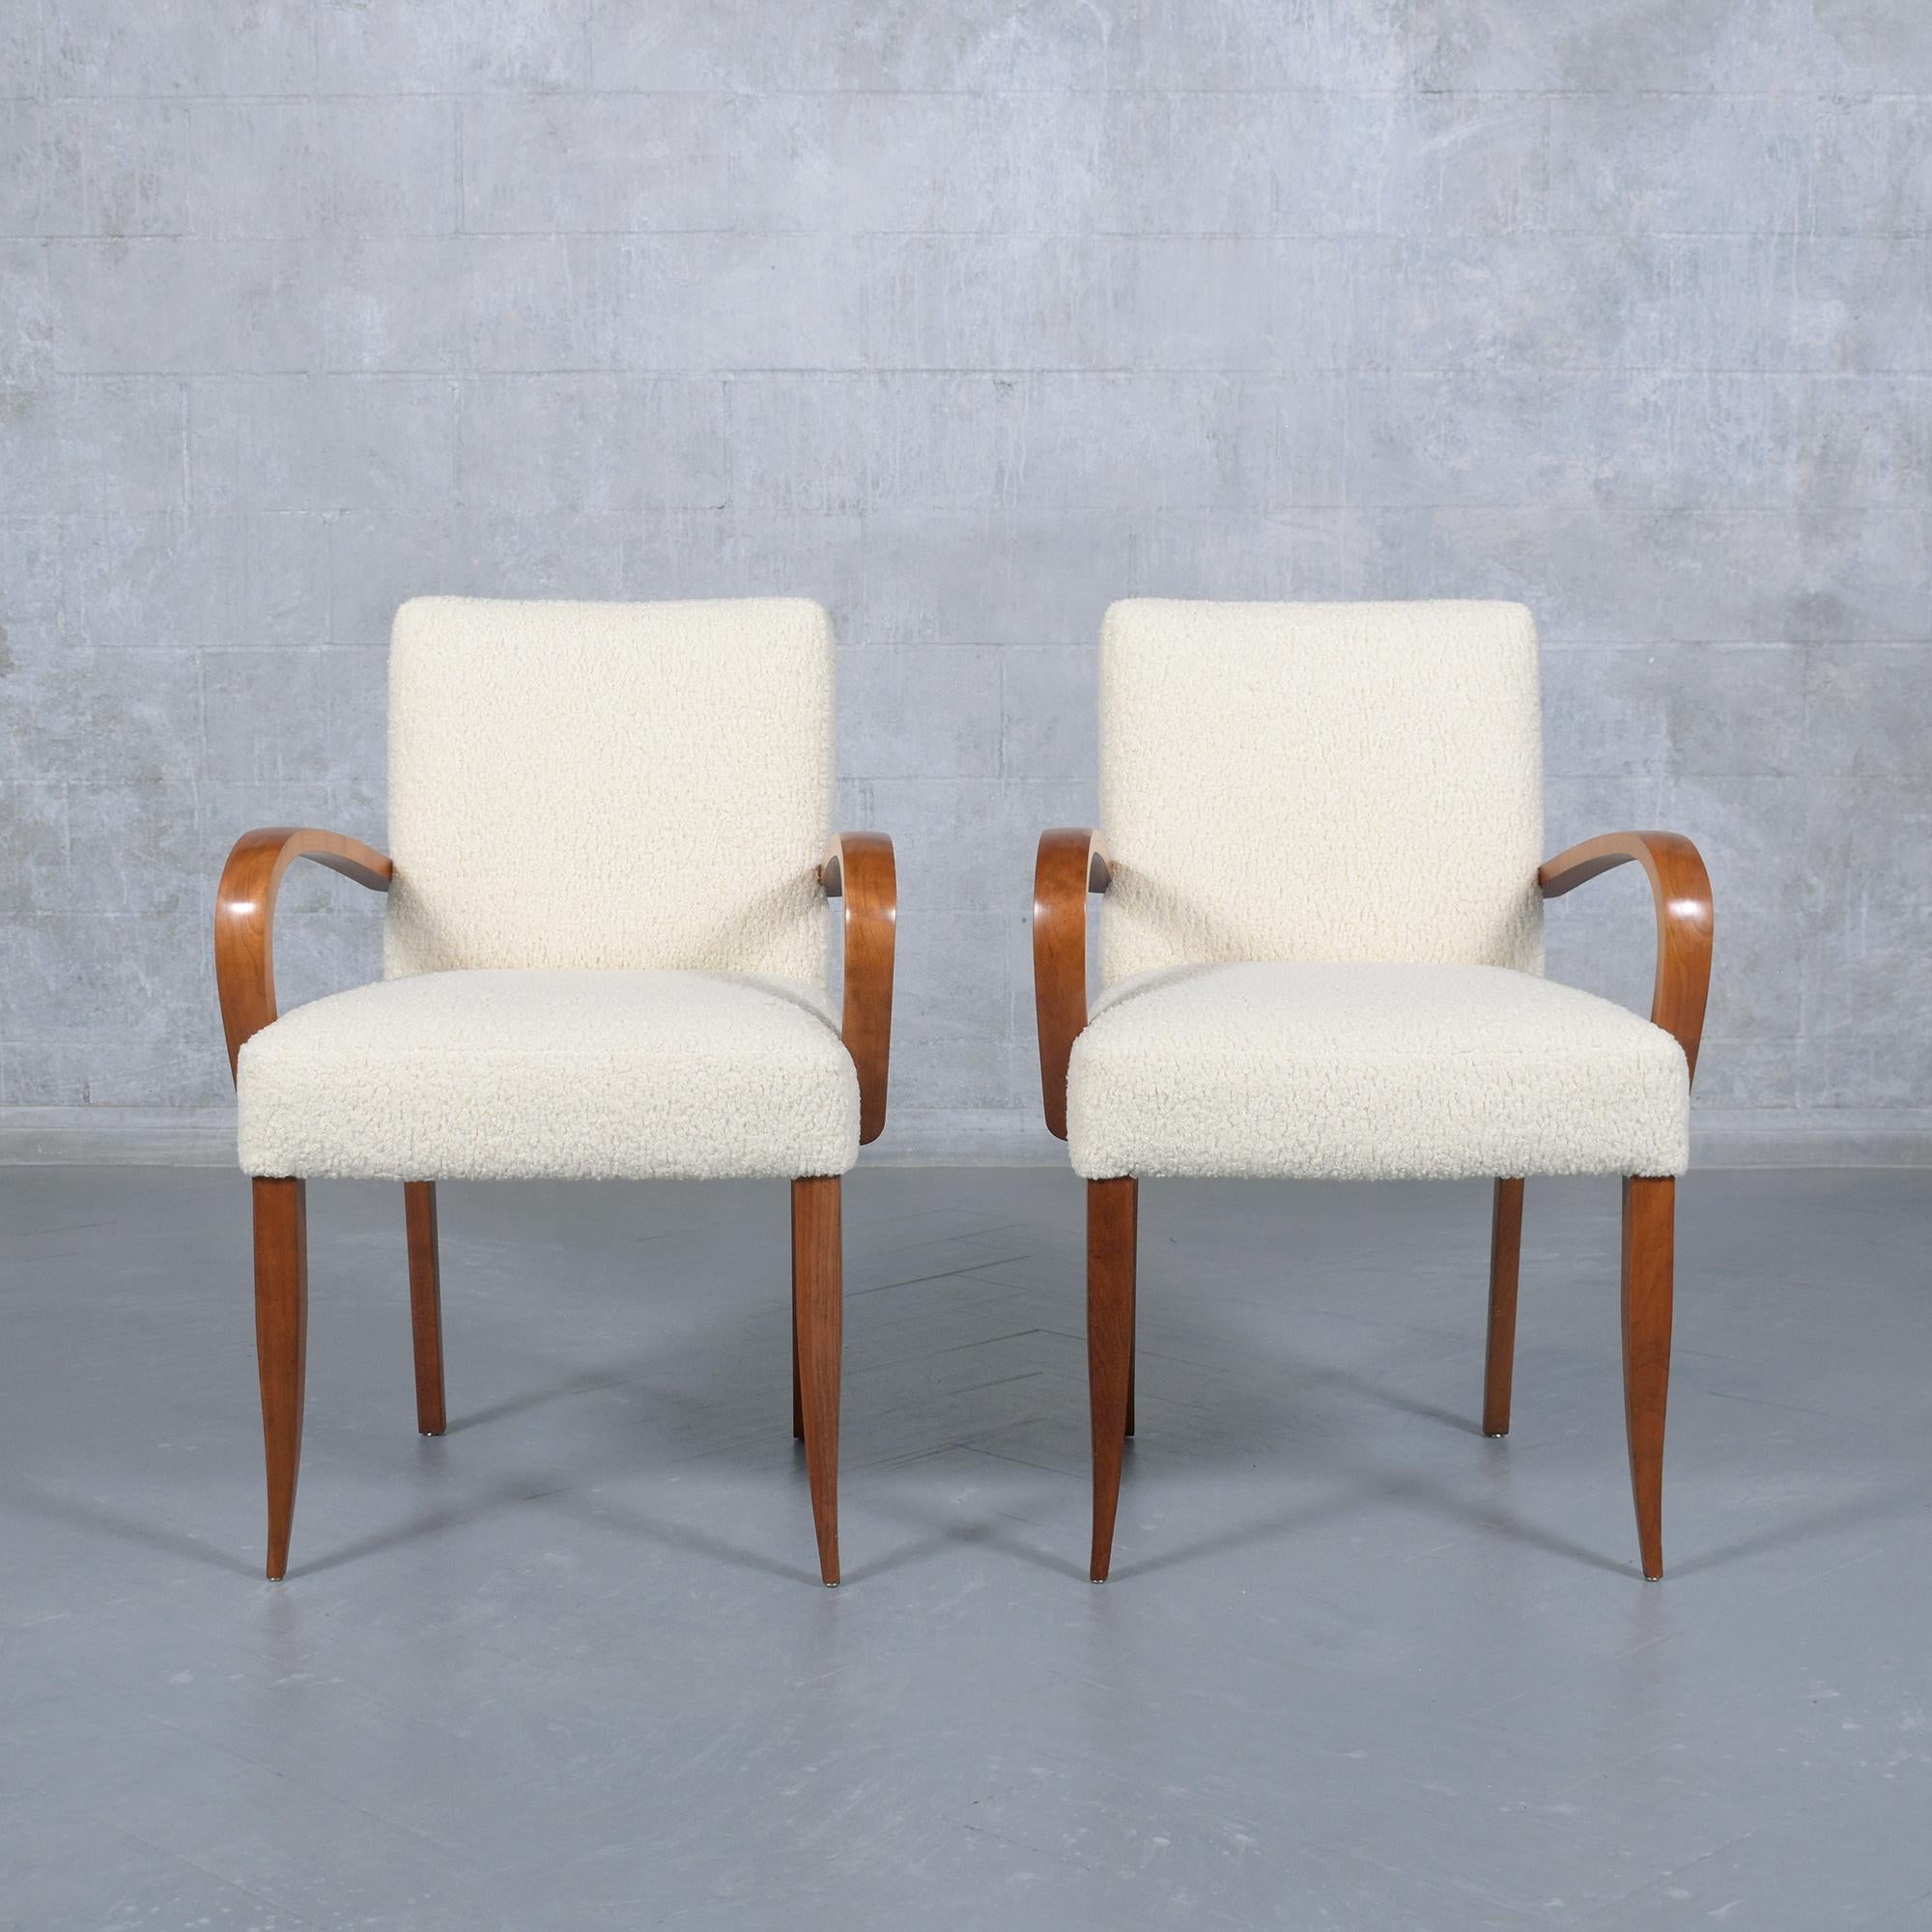 Delve into the refined elegance of our mid-century modern dining armchairs, each a symbol of expert craftsmanship and timeless design. Crafted from premium walnut, these two chairs have been meticulously restored by our skilled artisans, surpassing